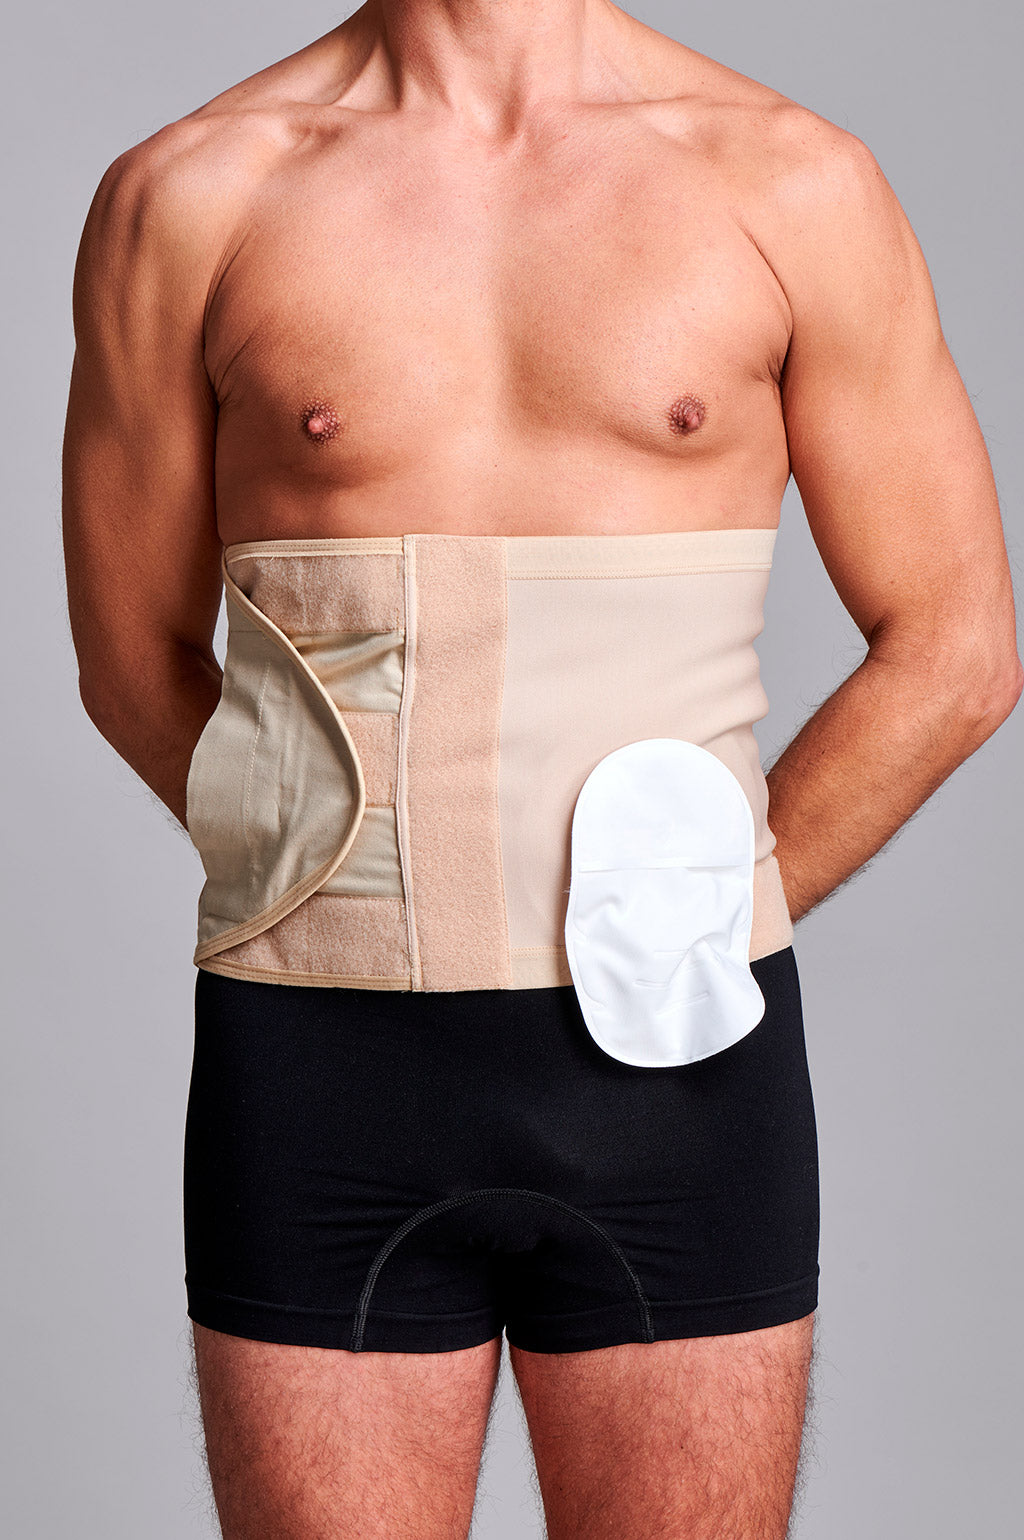 CUI Unisex Adjustable Hole Anti Roll Ostomy Hernia Support Belt -  16cm/6inch - 1 each, MEDIUM, LEFT - BEIGE - WITH POUCH OPENING